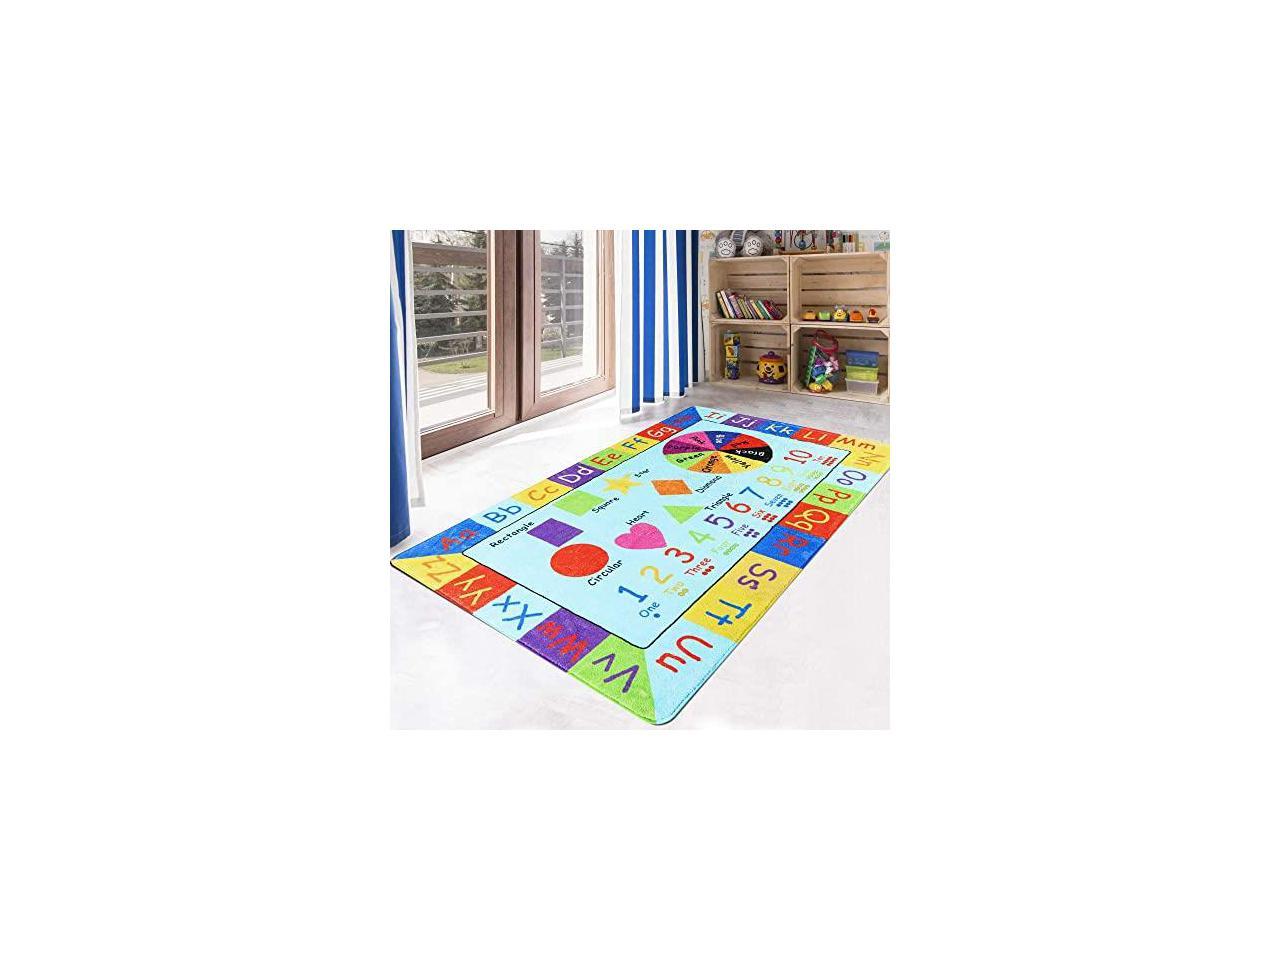 Faux Wool Kids Play Area Rugs Non-Slip Childrens Carpet ABC Number and Color Educational Learning /& Gameor Living Room Bedroom Playroom Nursery Best Shower Gift HAOCOO Play Mat 4x6 ft